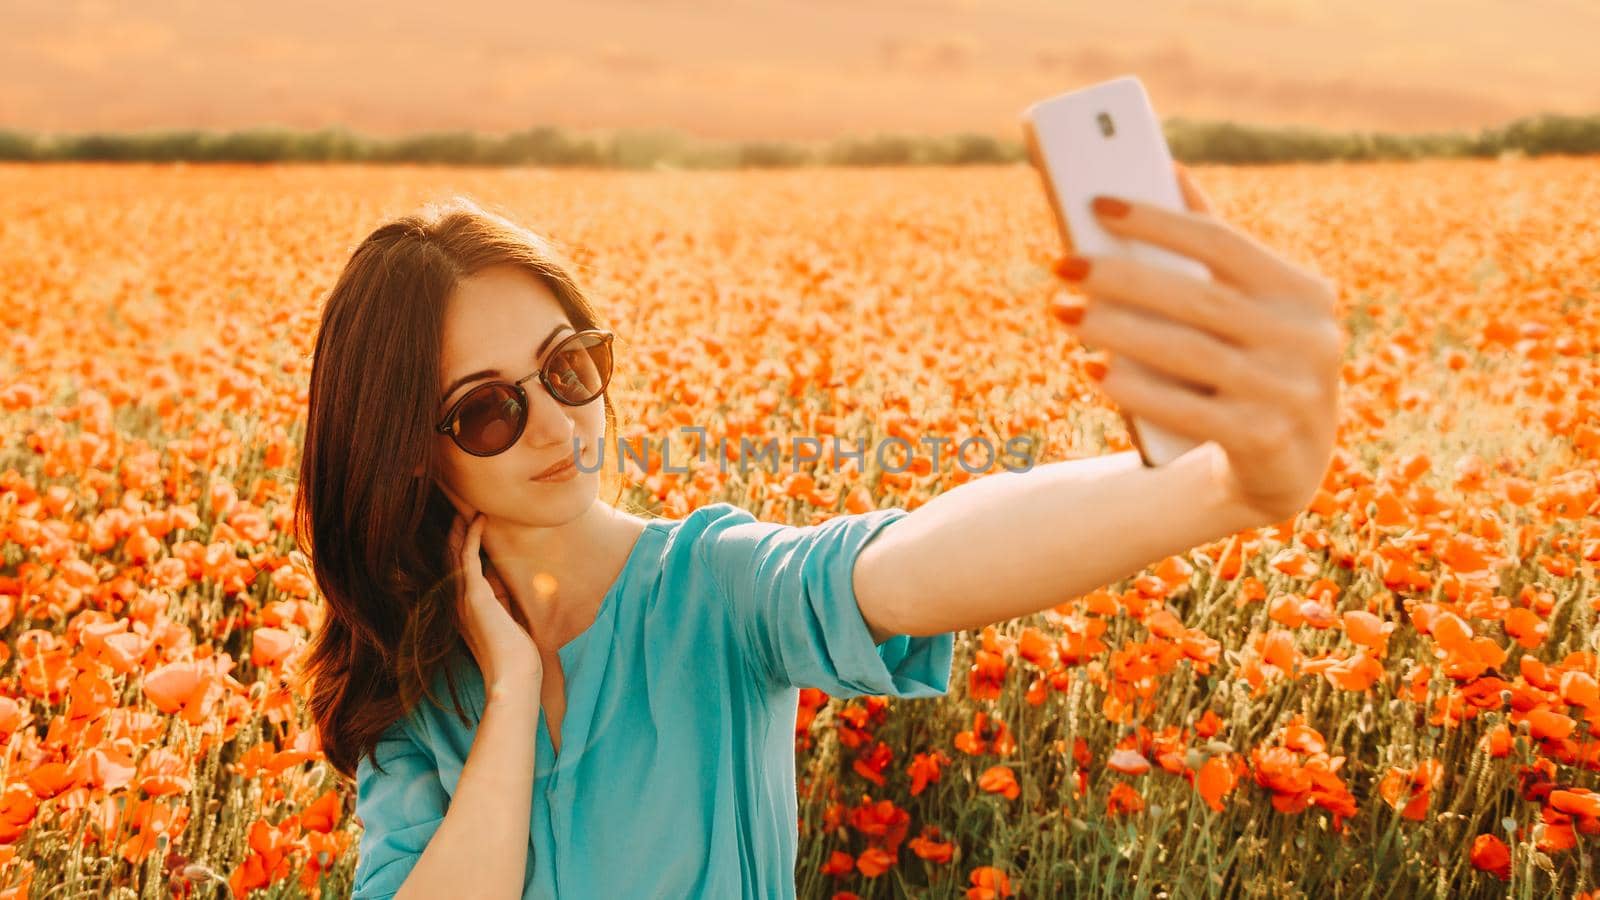 Beautiful girl making selfie with smartphone on background of poppies flower meadow in summer at sunset.